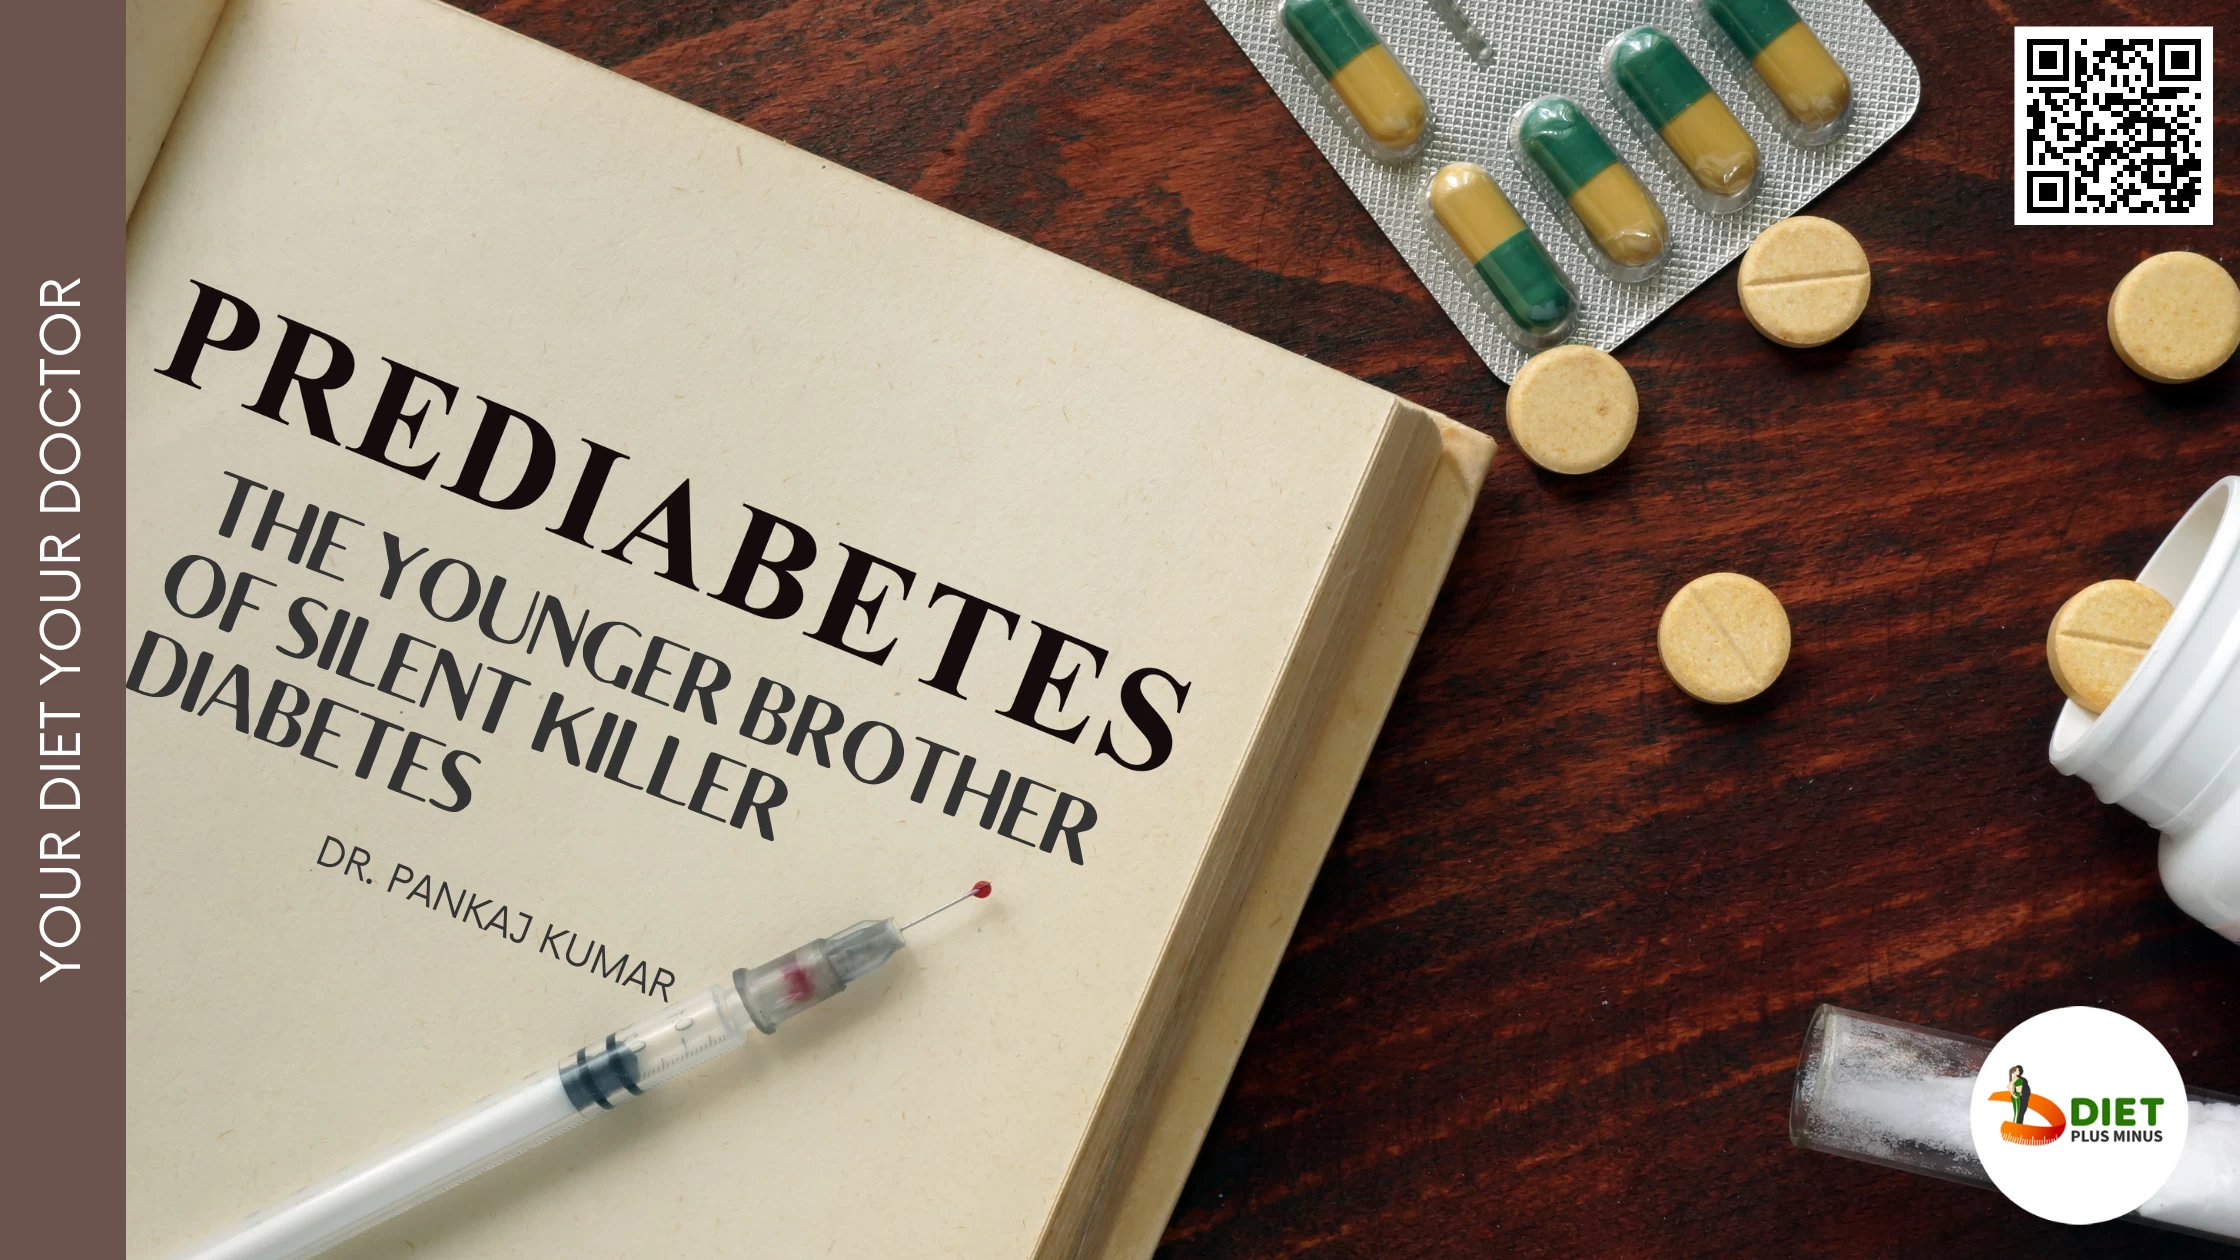 Prediabetes The Younger Brother of Silent Killer Diabetes